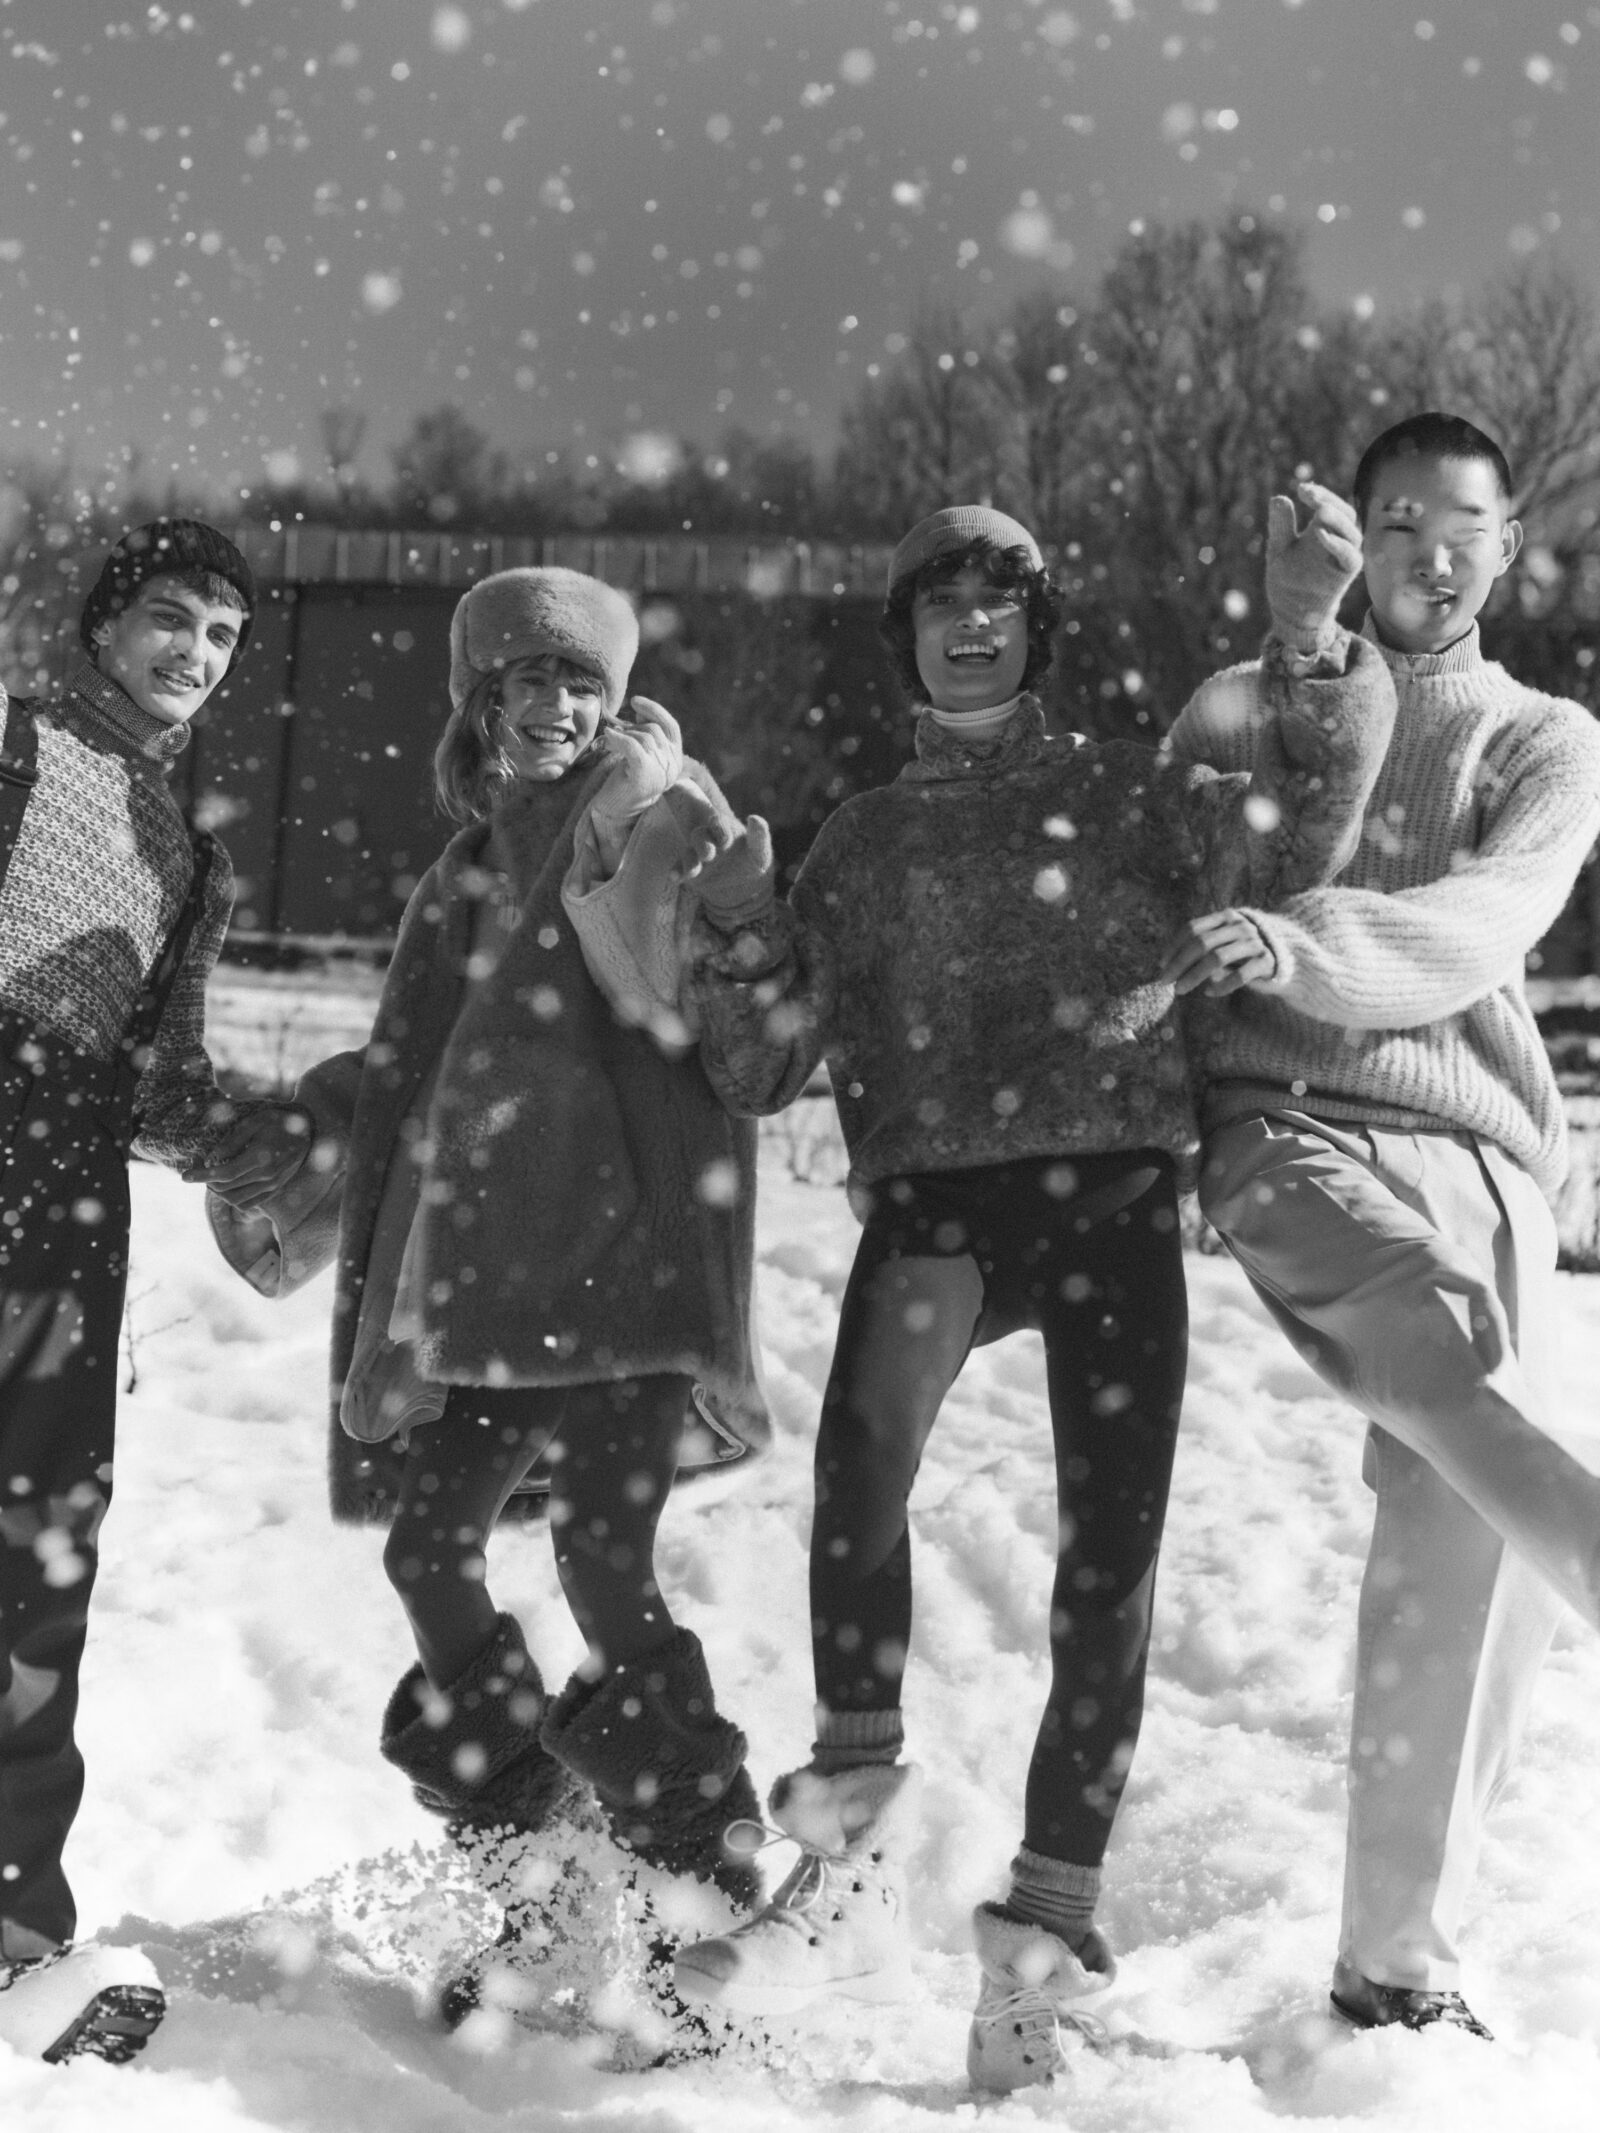 Joyful moments in the snow with Loro Piana's Holiday Collection, as models exhibit the brand's commitment to luxury, warmth, and festive refinement.